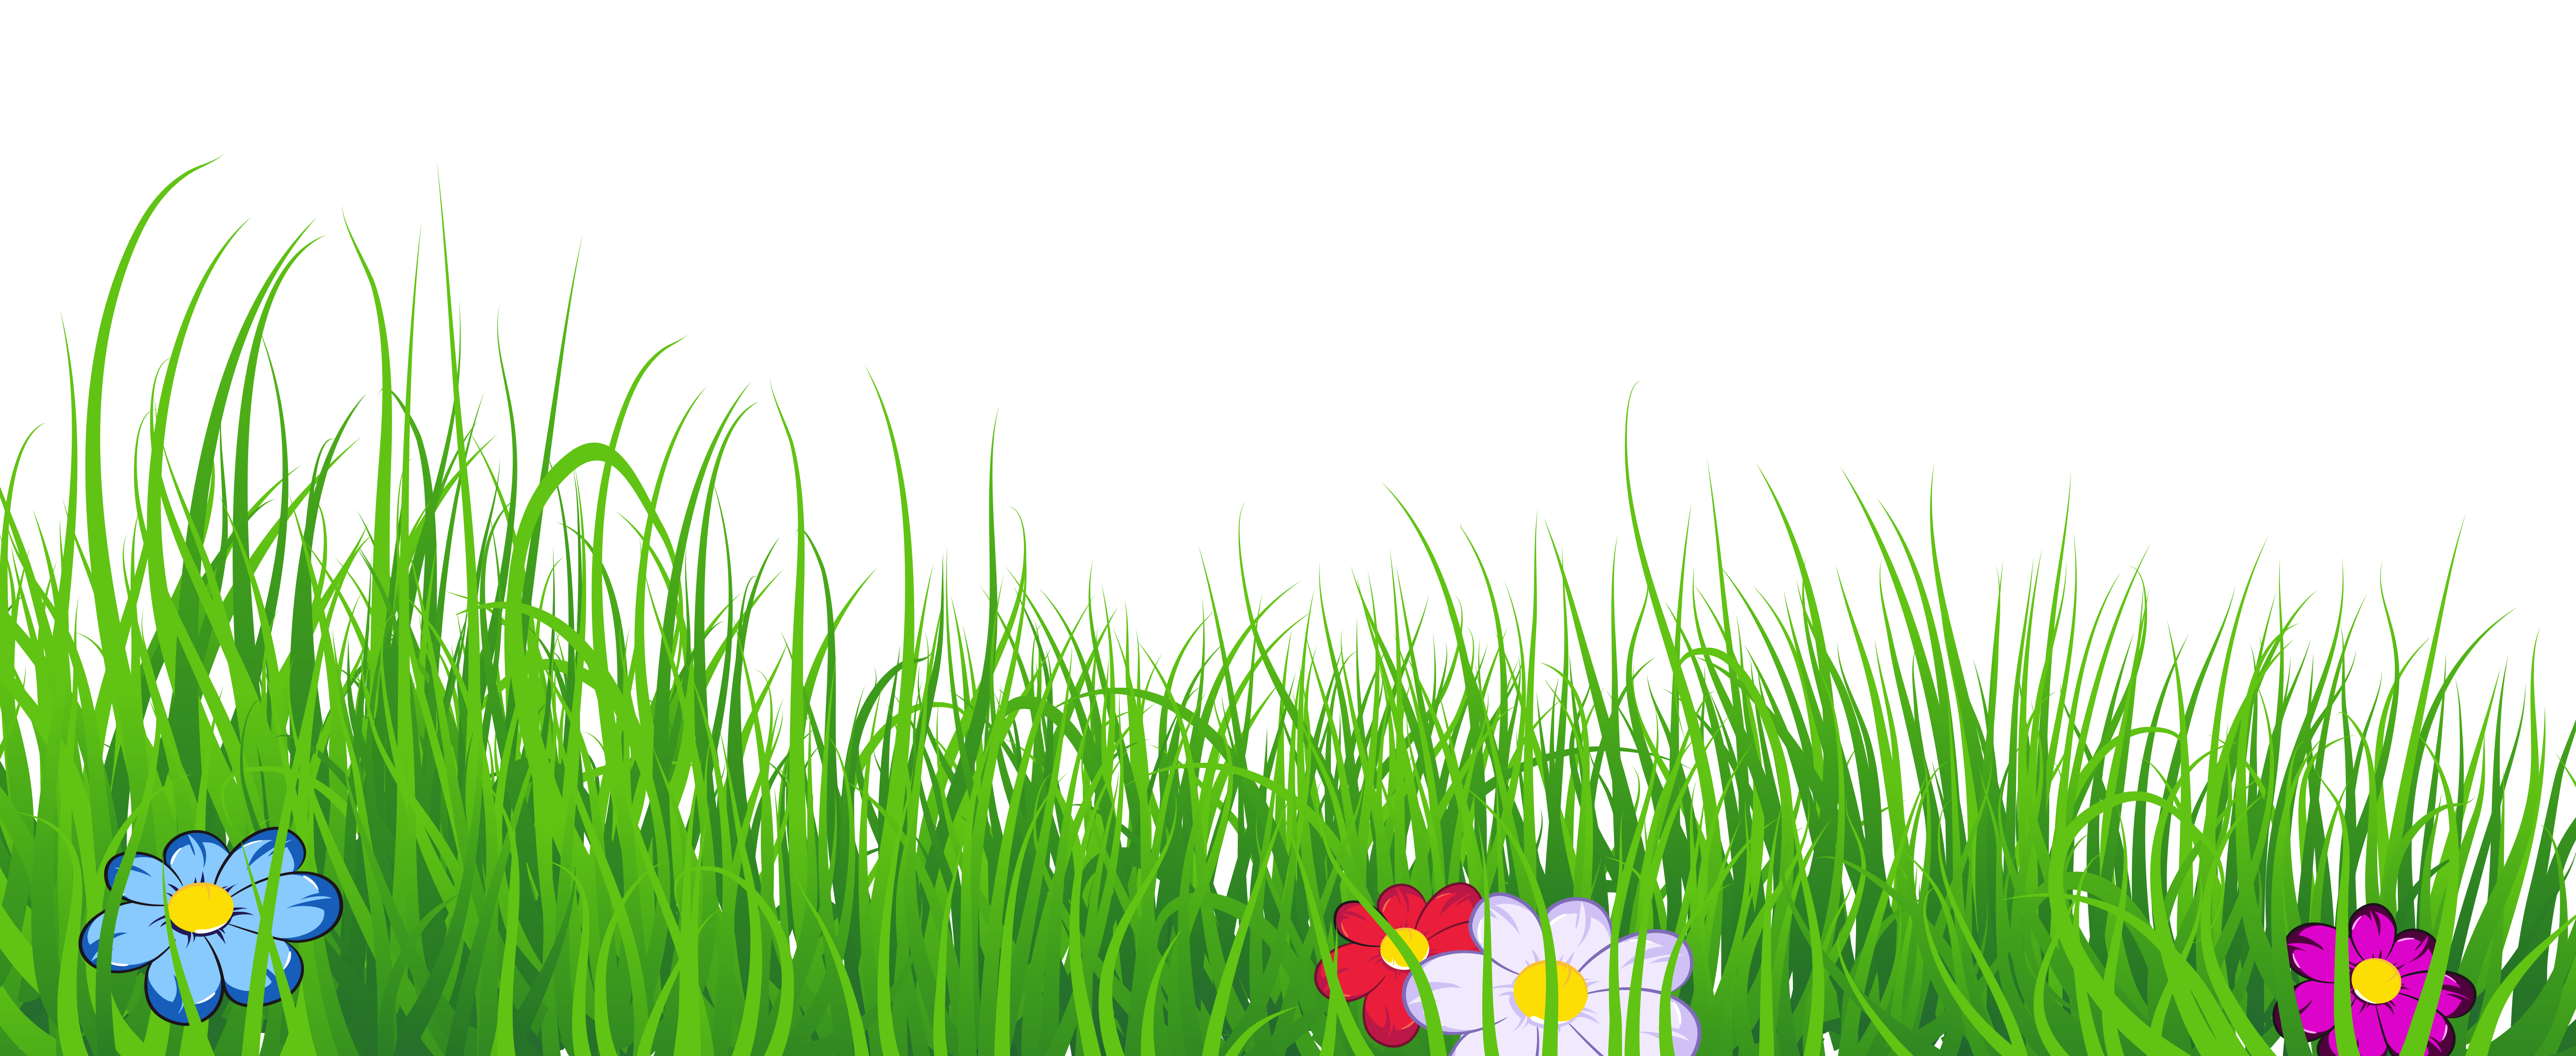 Grass transparent gallery yopriceville. Youtube clipart nature